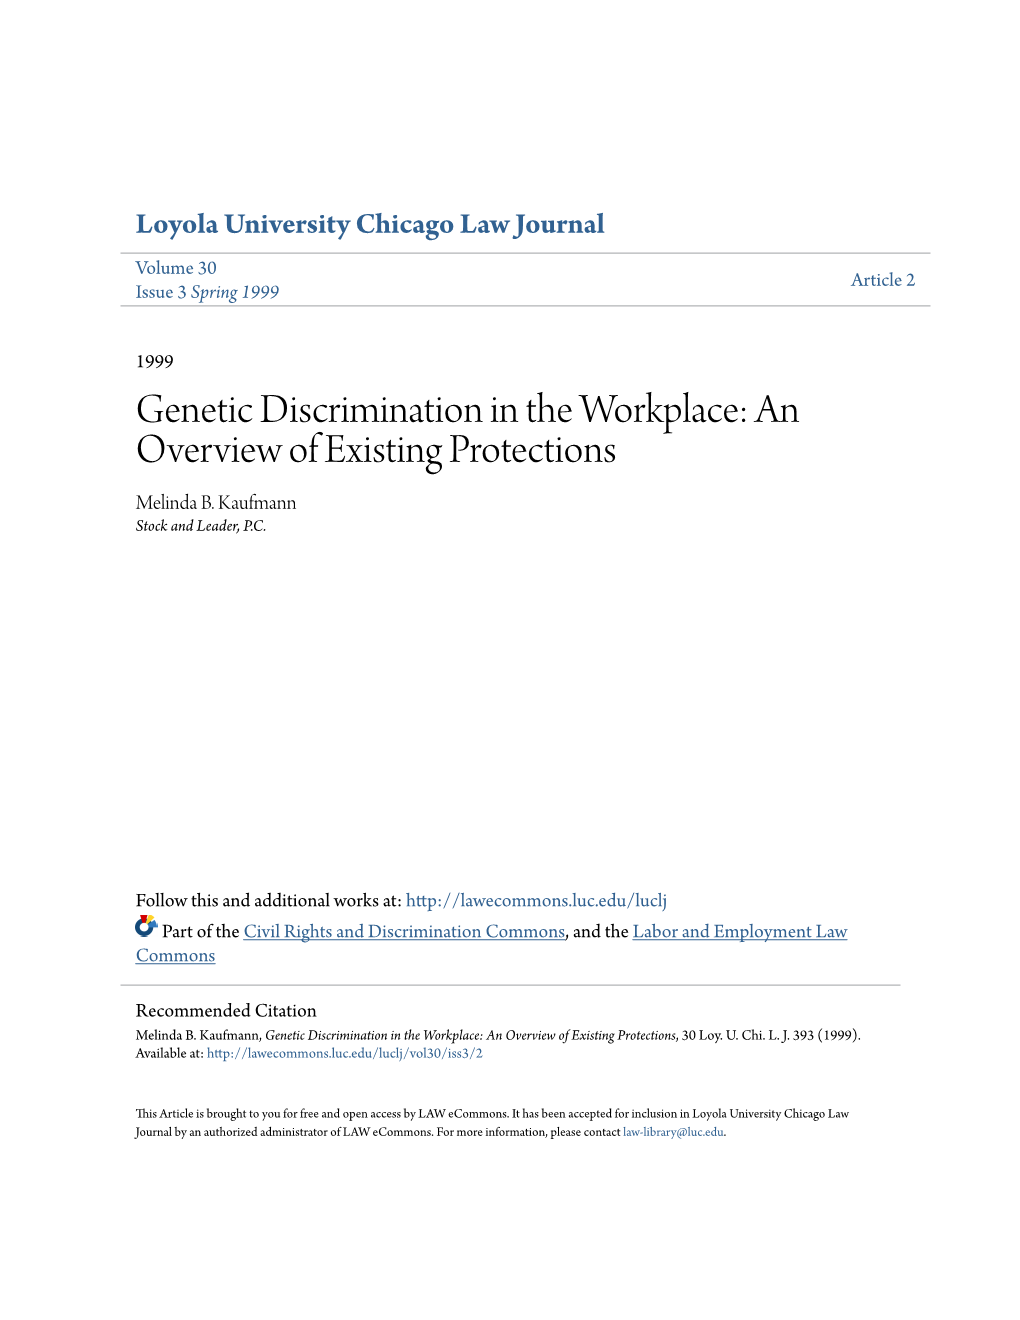 Genetic Discrimination in the Workplace: an Overview of Existing Protections Melinda B